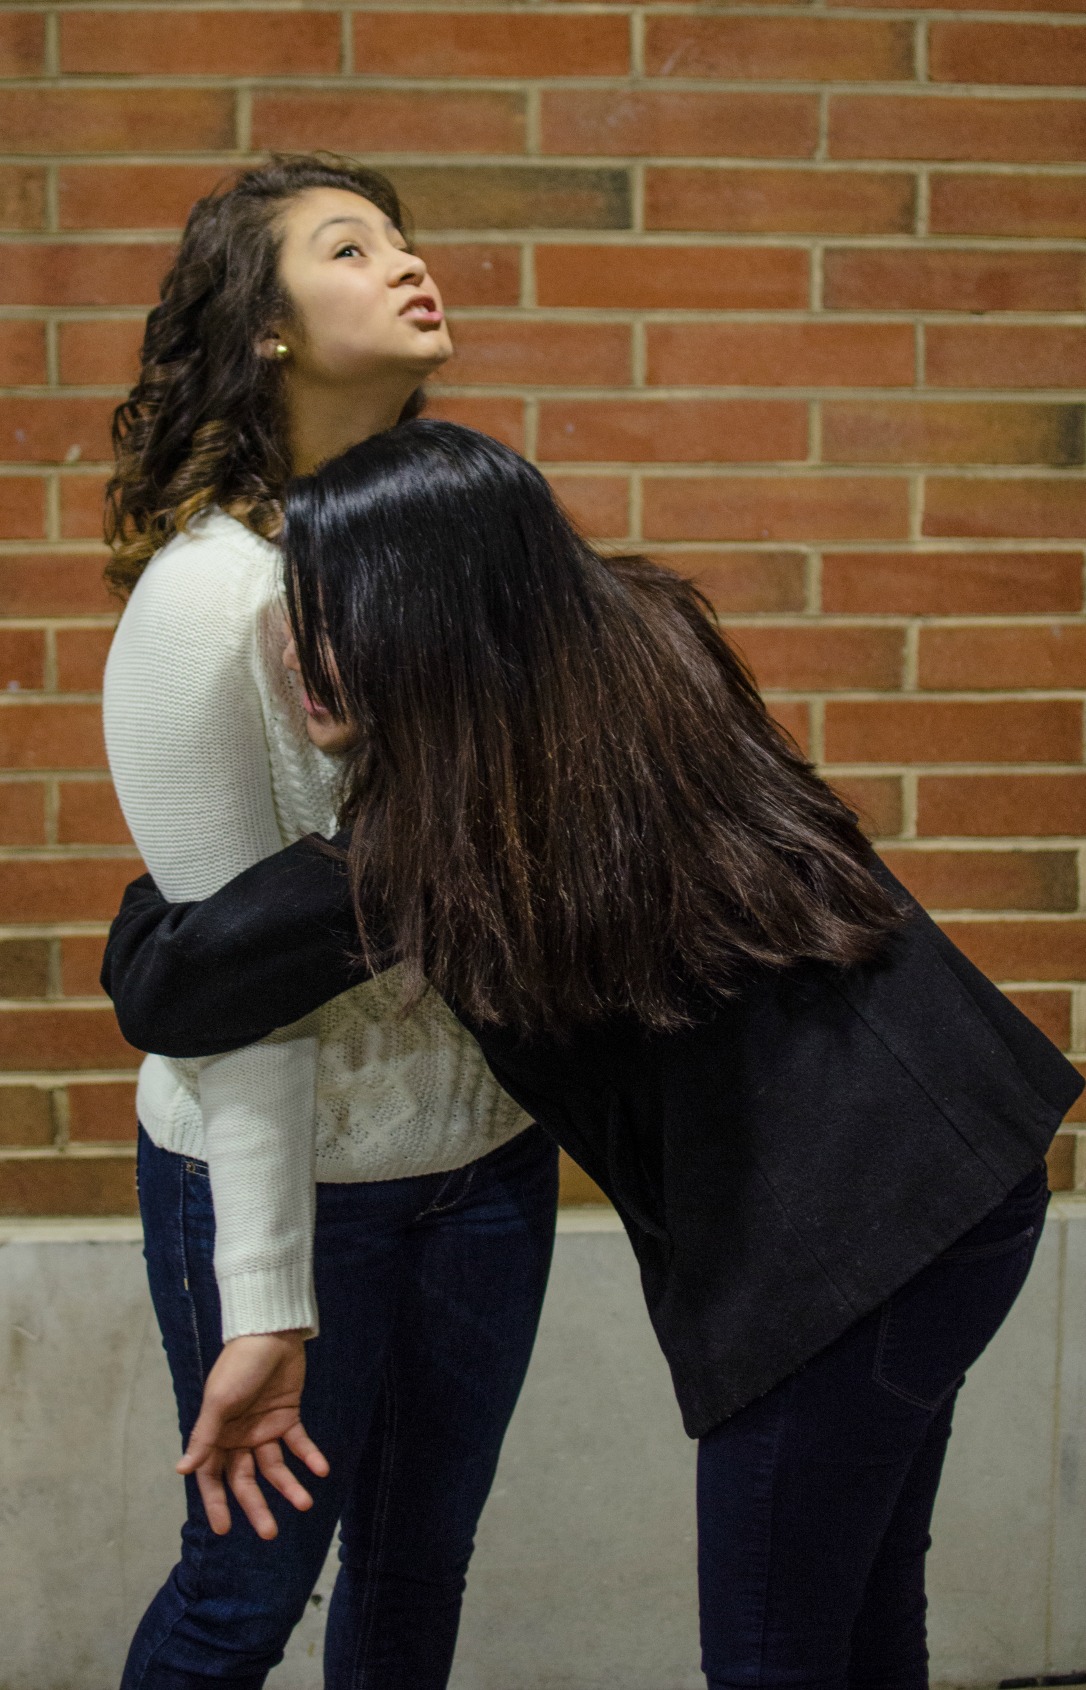 College Crisis: The Clingy Roommate